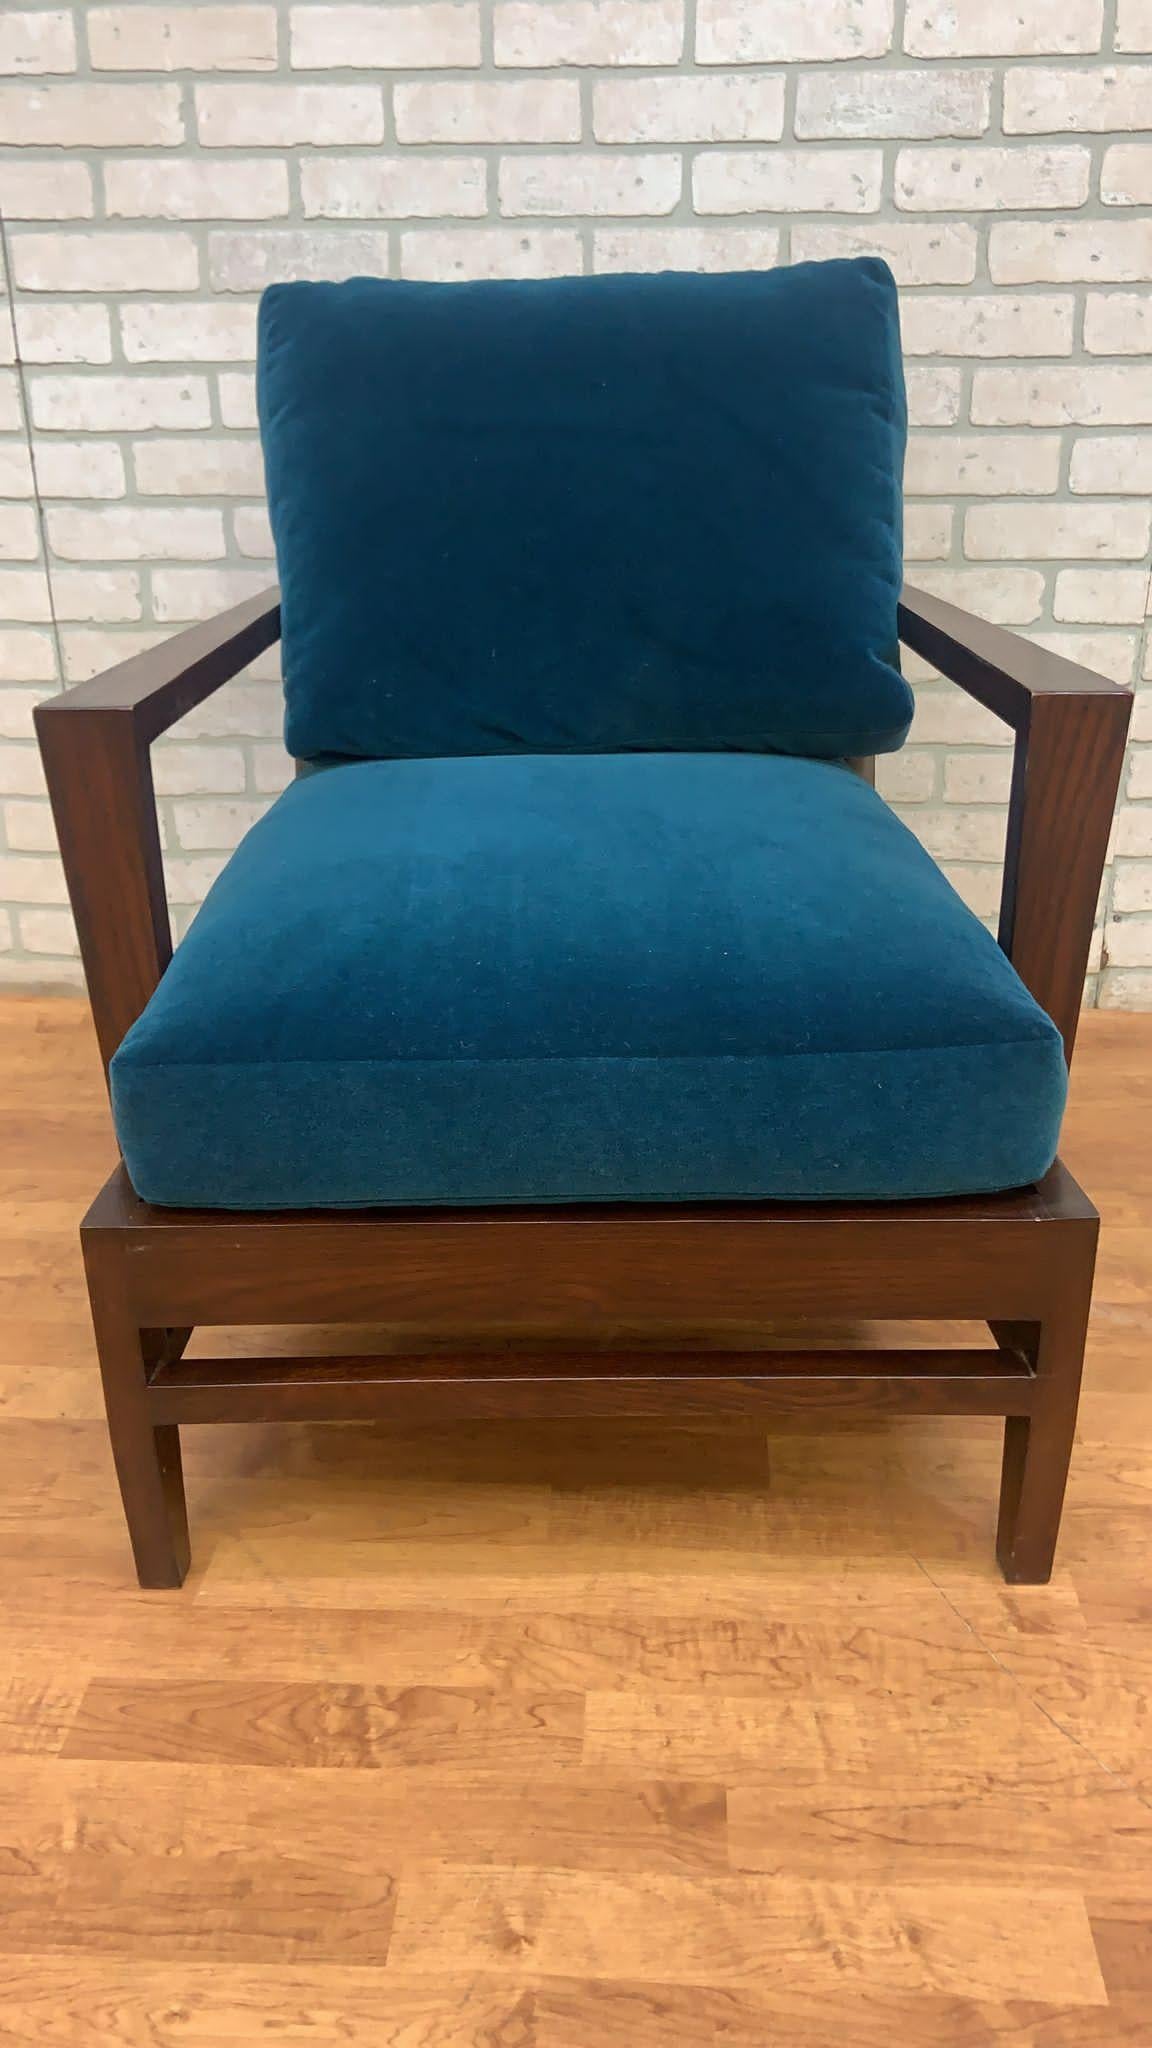 Vintage French René Gabriel Cherry Wood Slat Back Lounge Chair in Teal Mohair For Sale 1